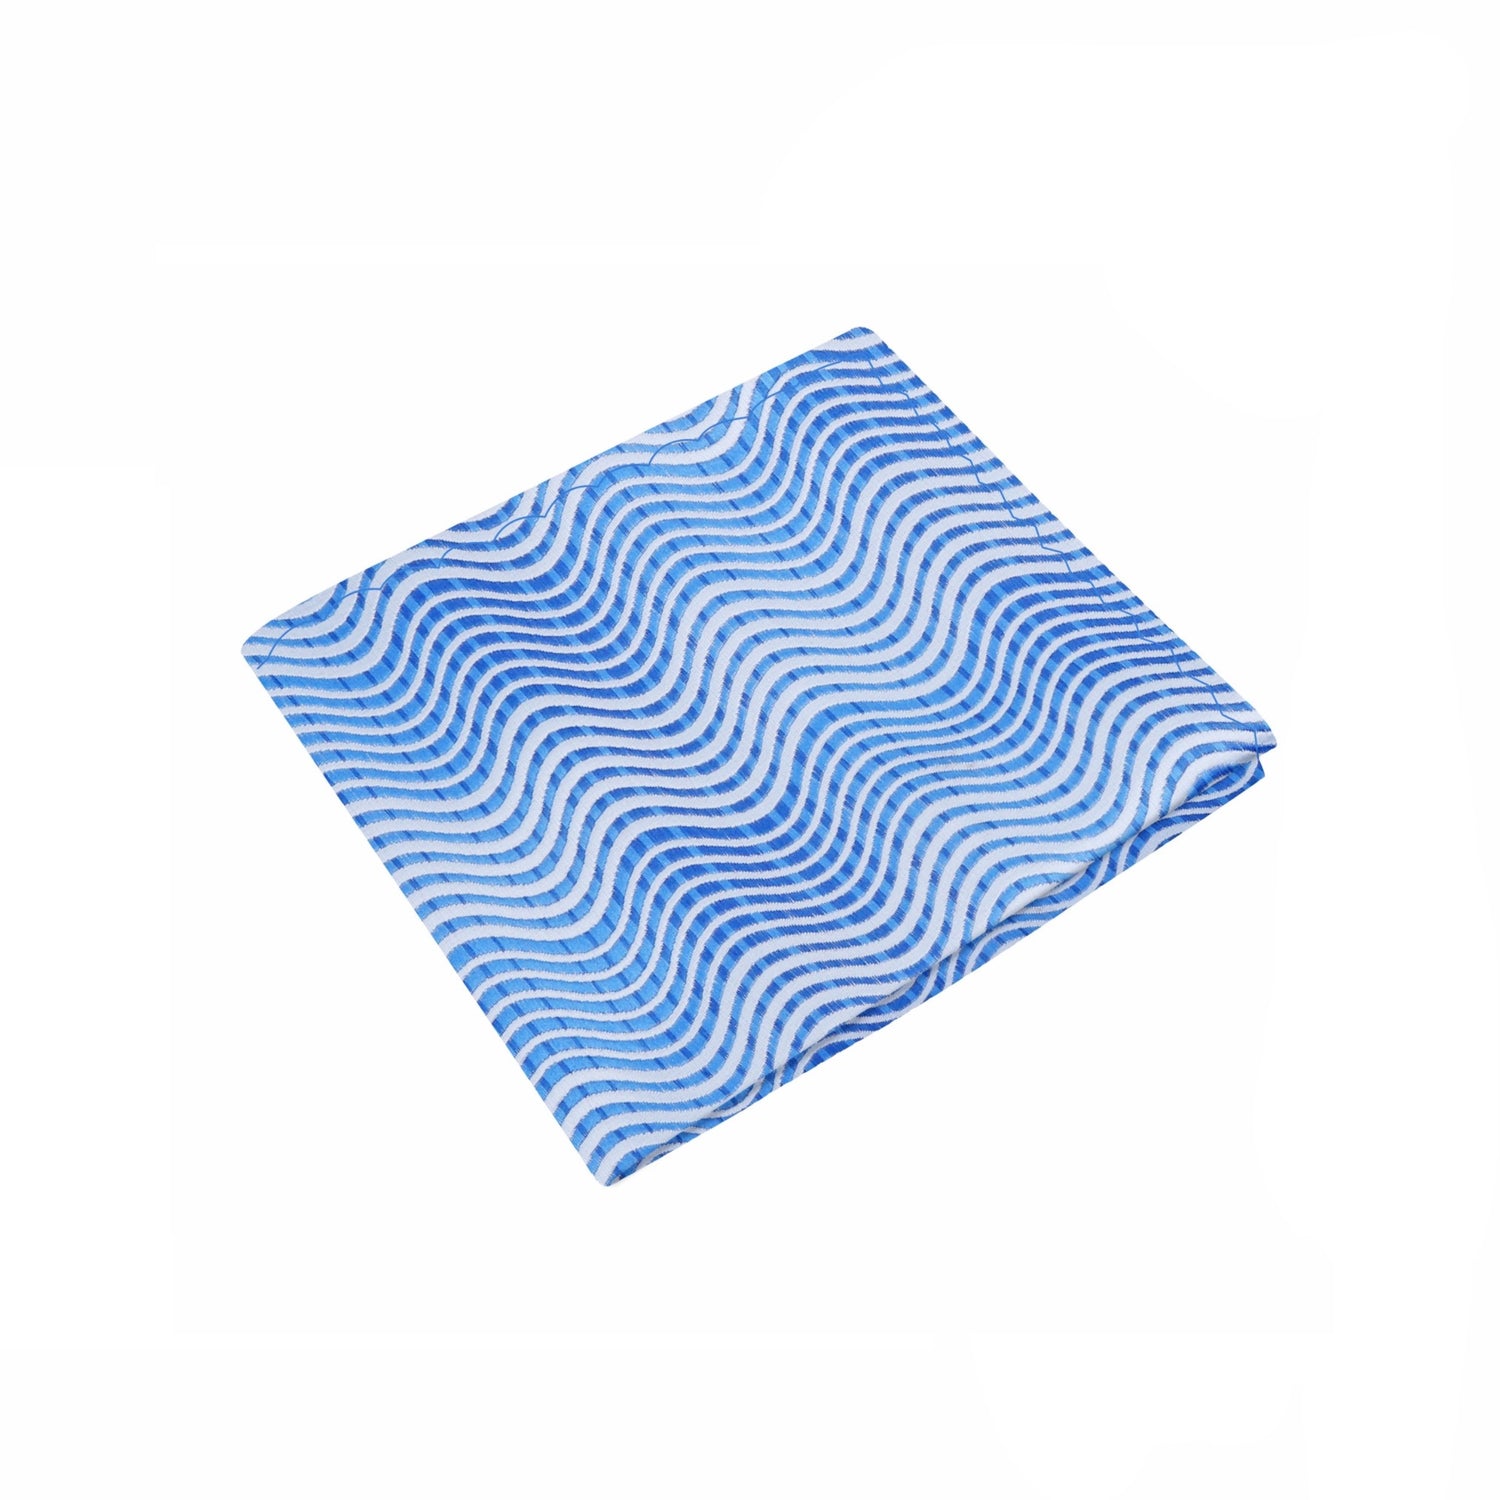 Shades of Blue Wavy Lines Pocket Square